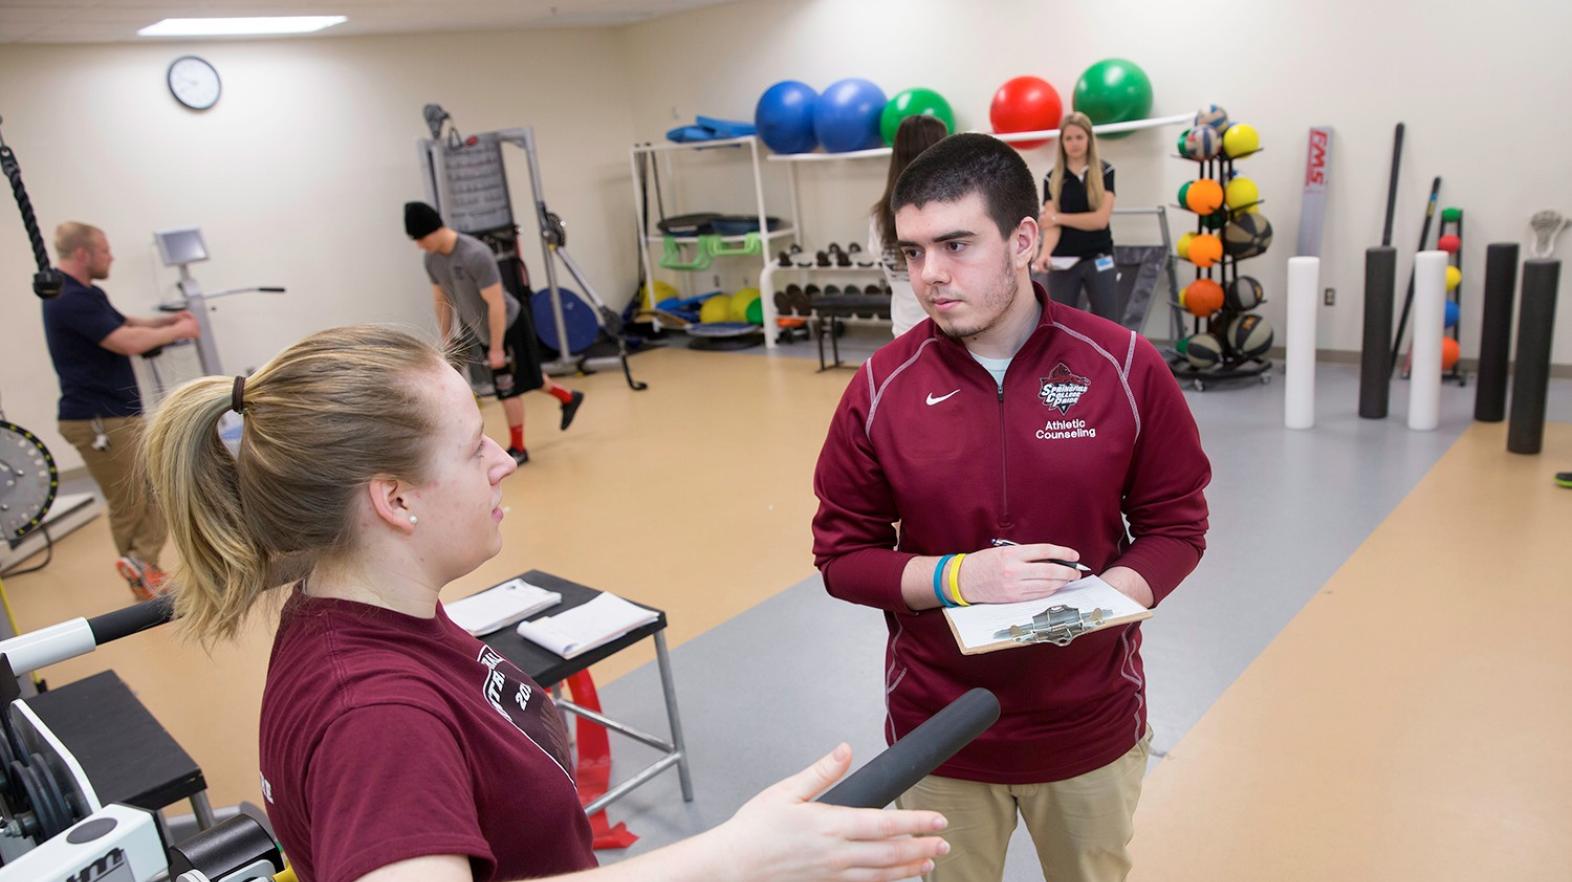 Athletic counseling students practicing classroom skills in a facility on the campus